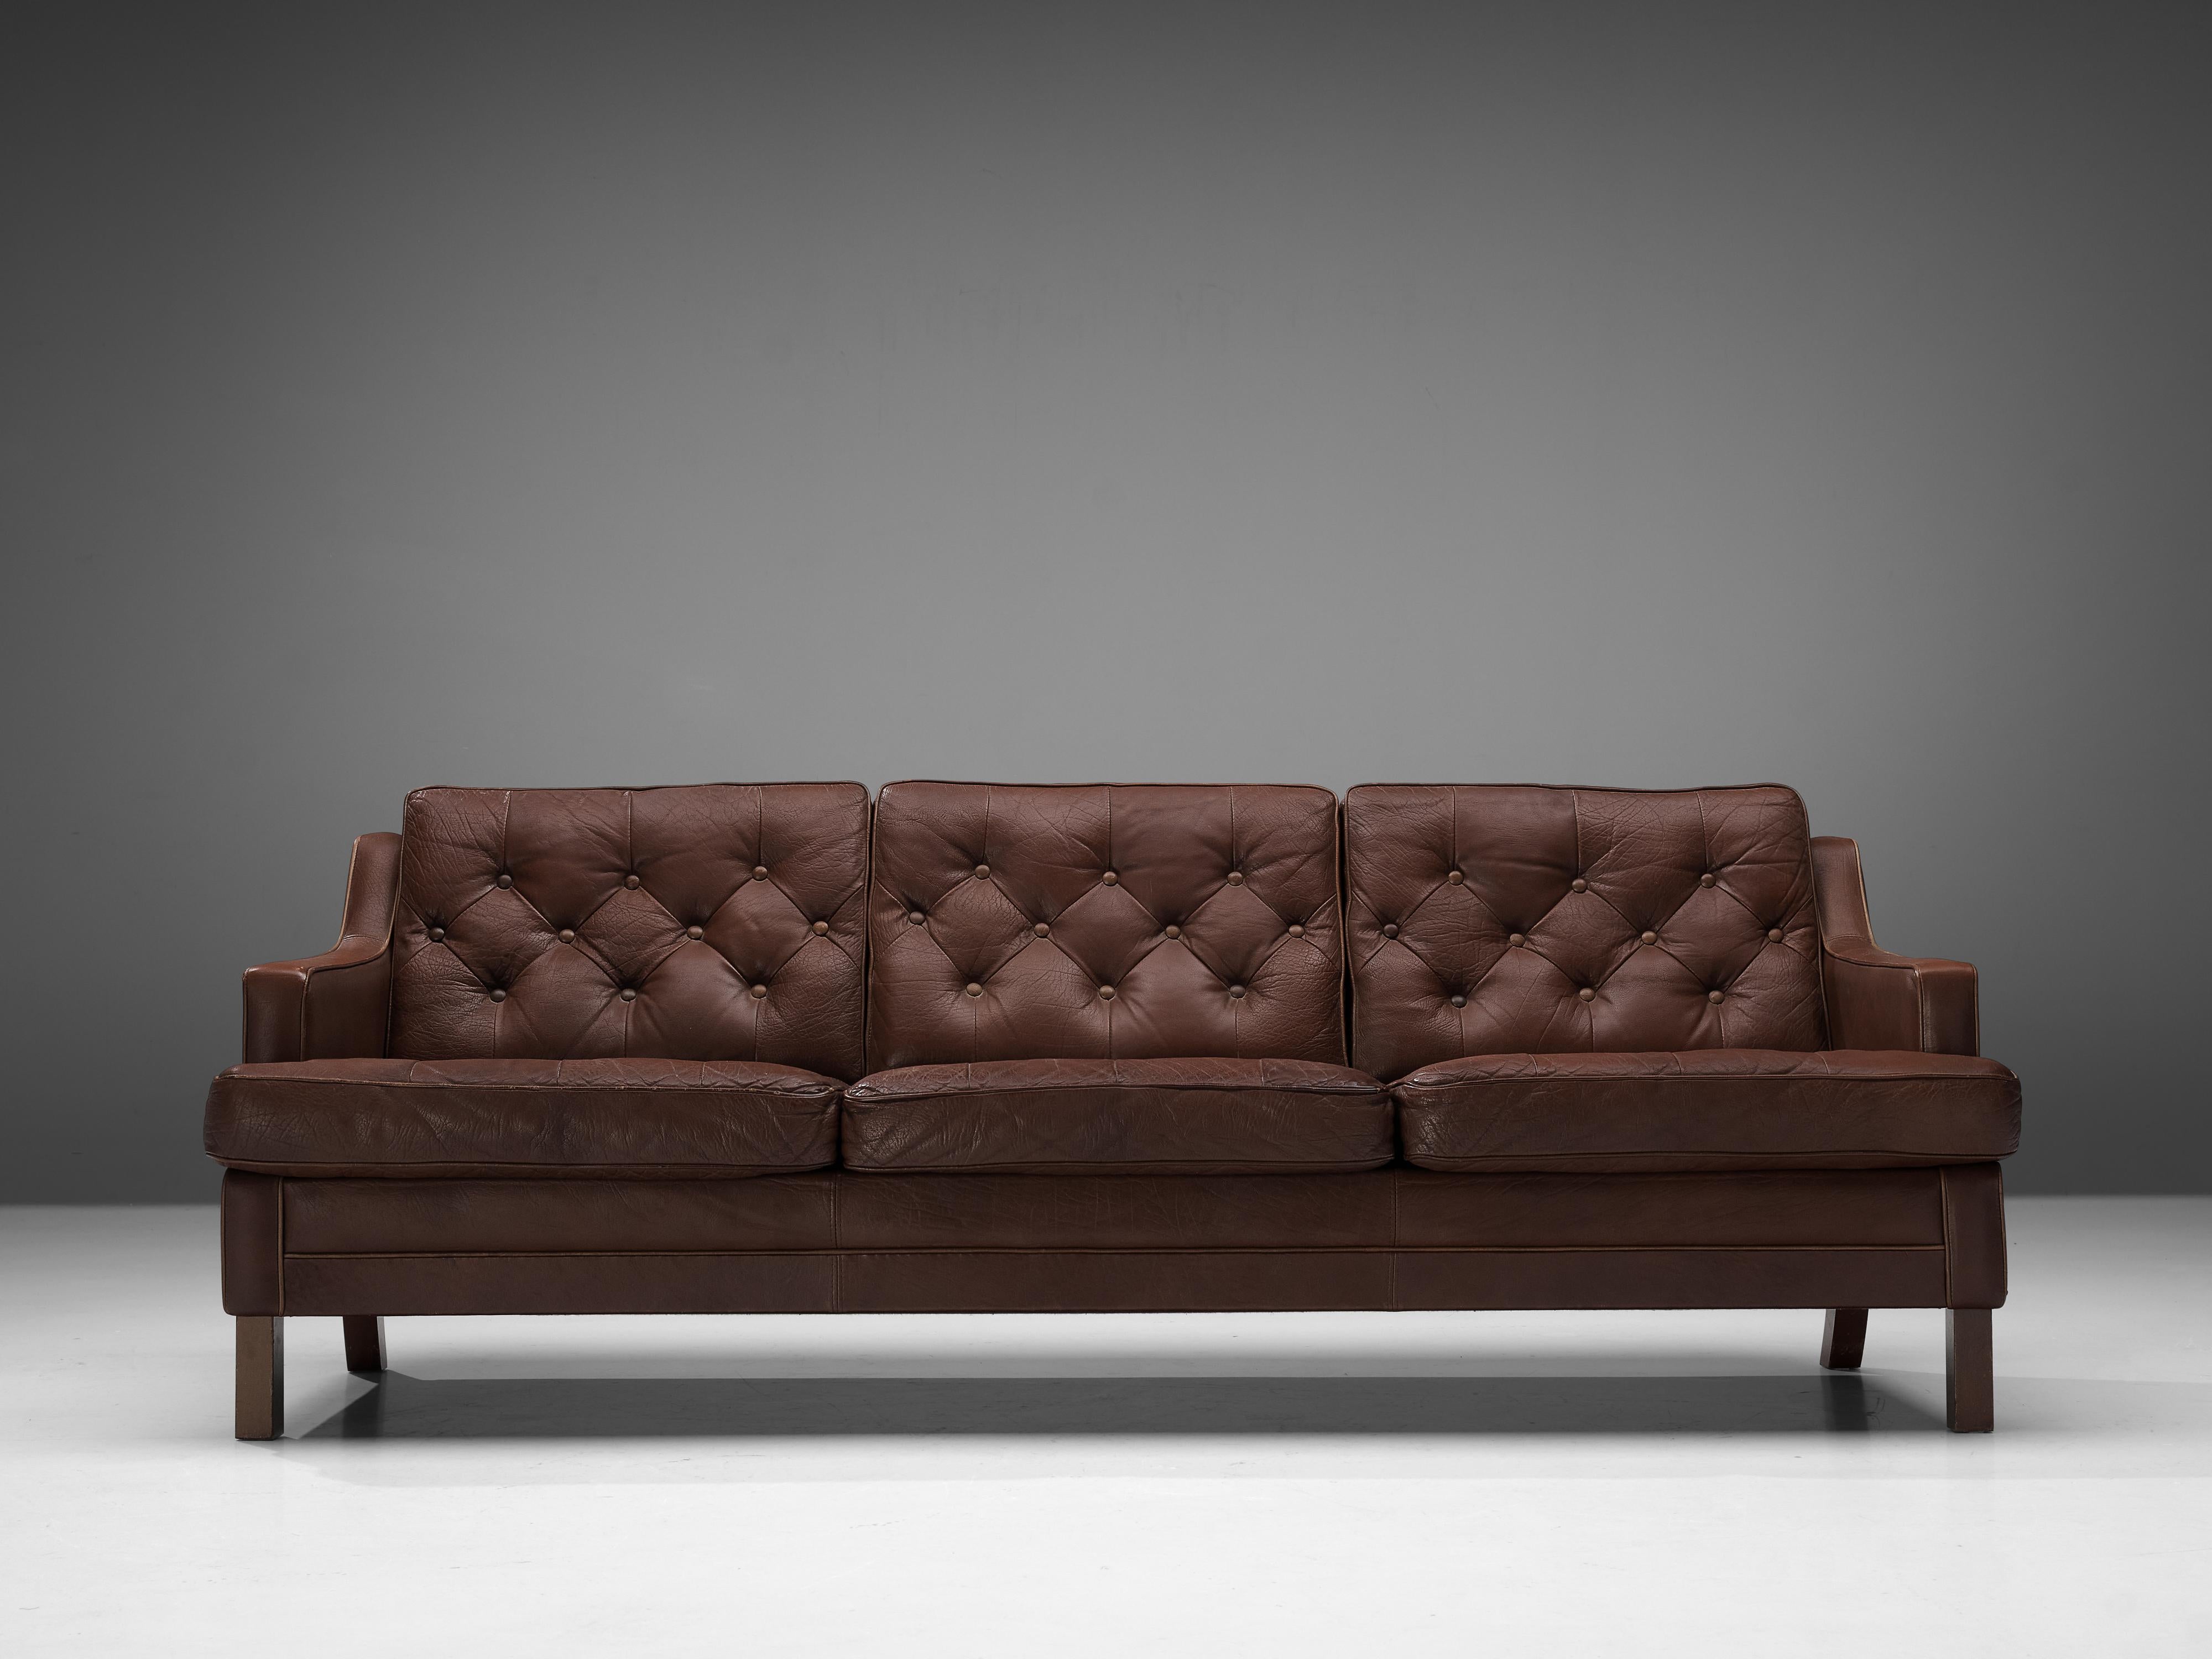 Arne Norell, sofa, brown leather and wood, Sweden, 1960s

Three seater sofa by Arne Norell. This sofa is refined, modern and with a classical touch. A true Swedish and Norell design. The sofa is made of brown leather with four cubic shaped wooden